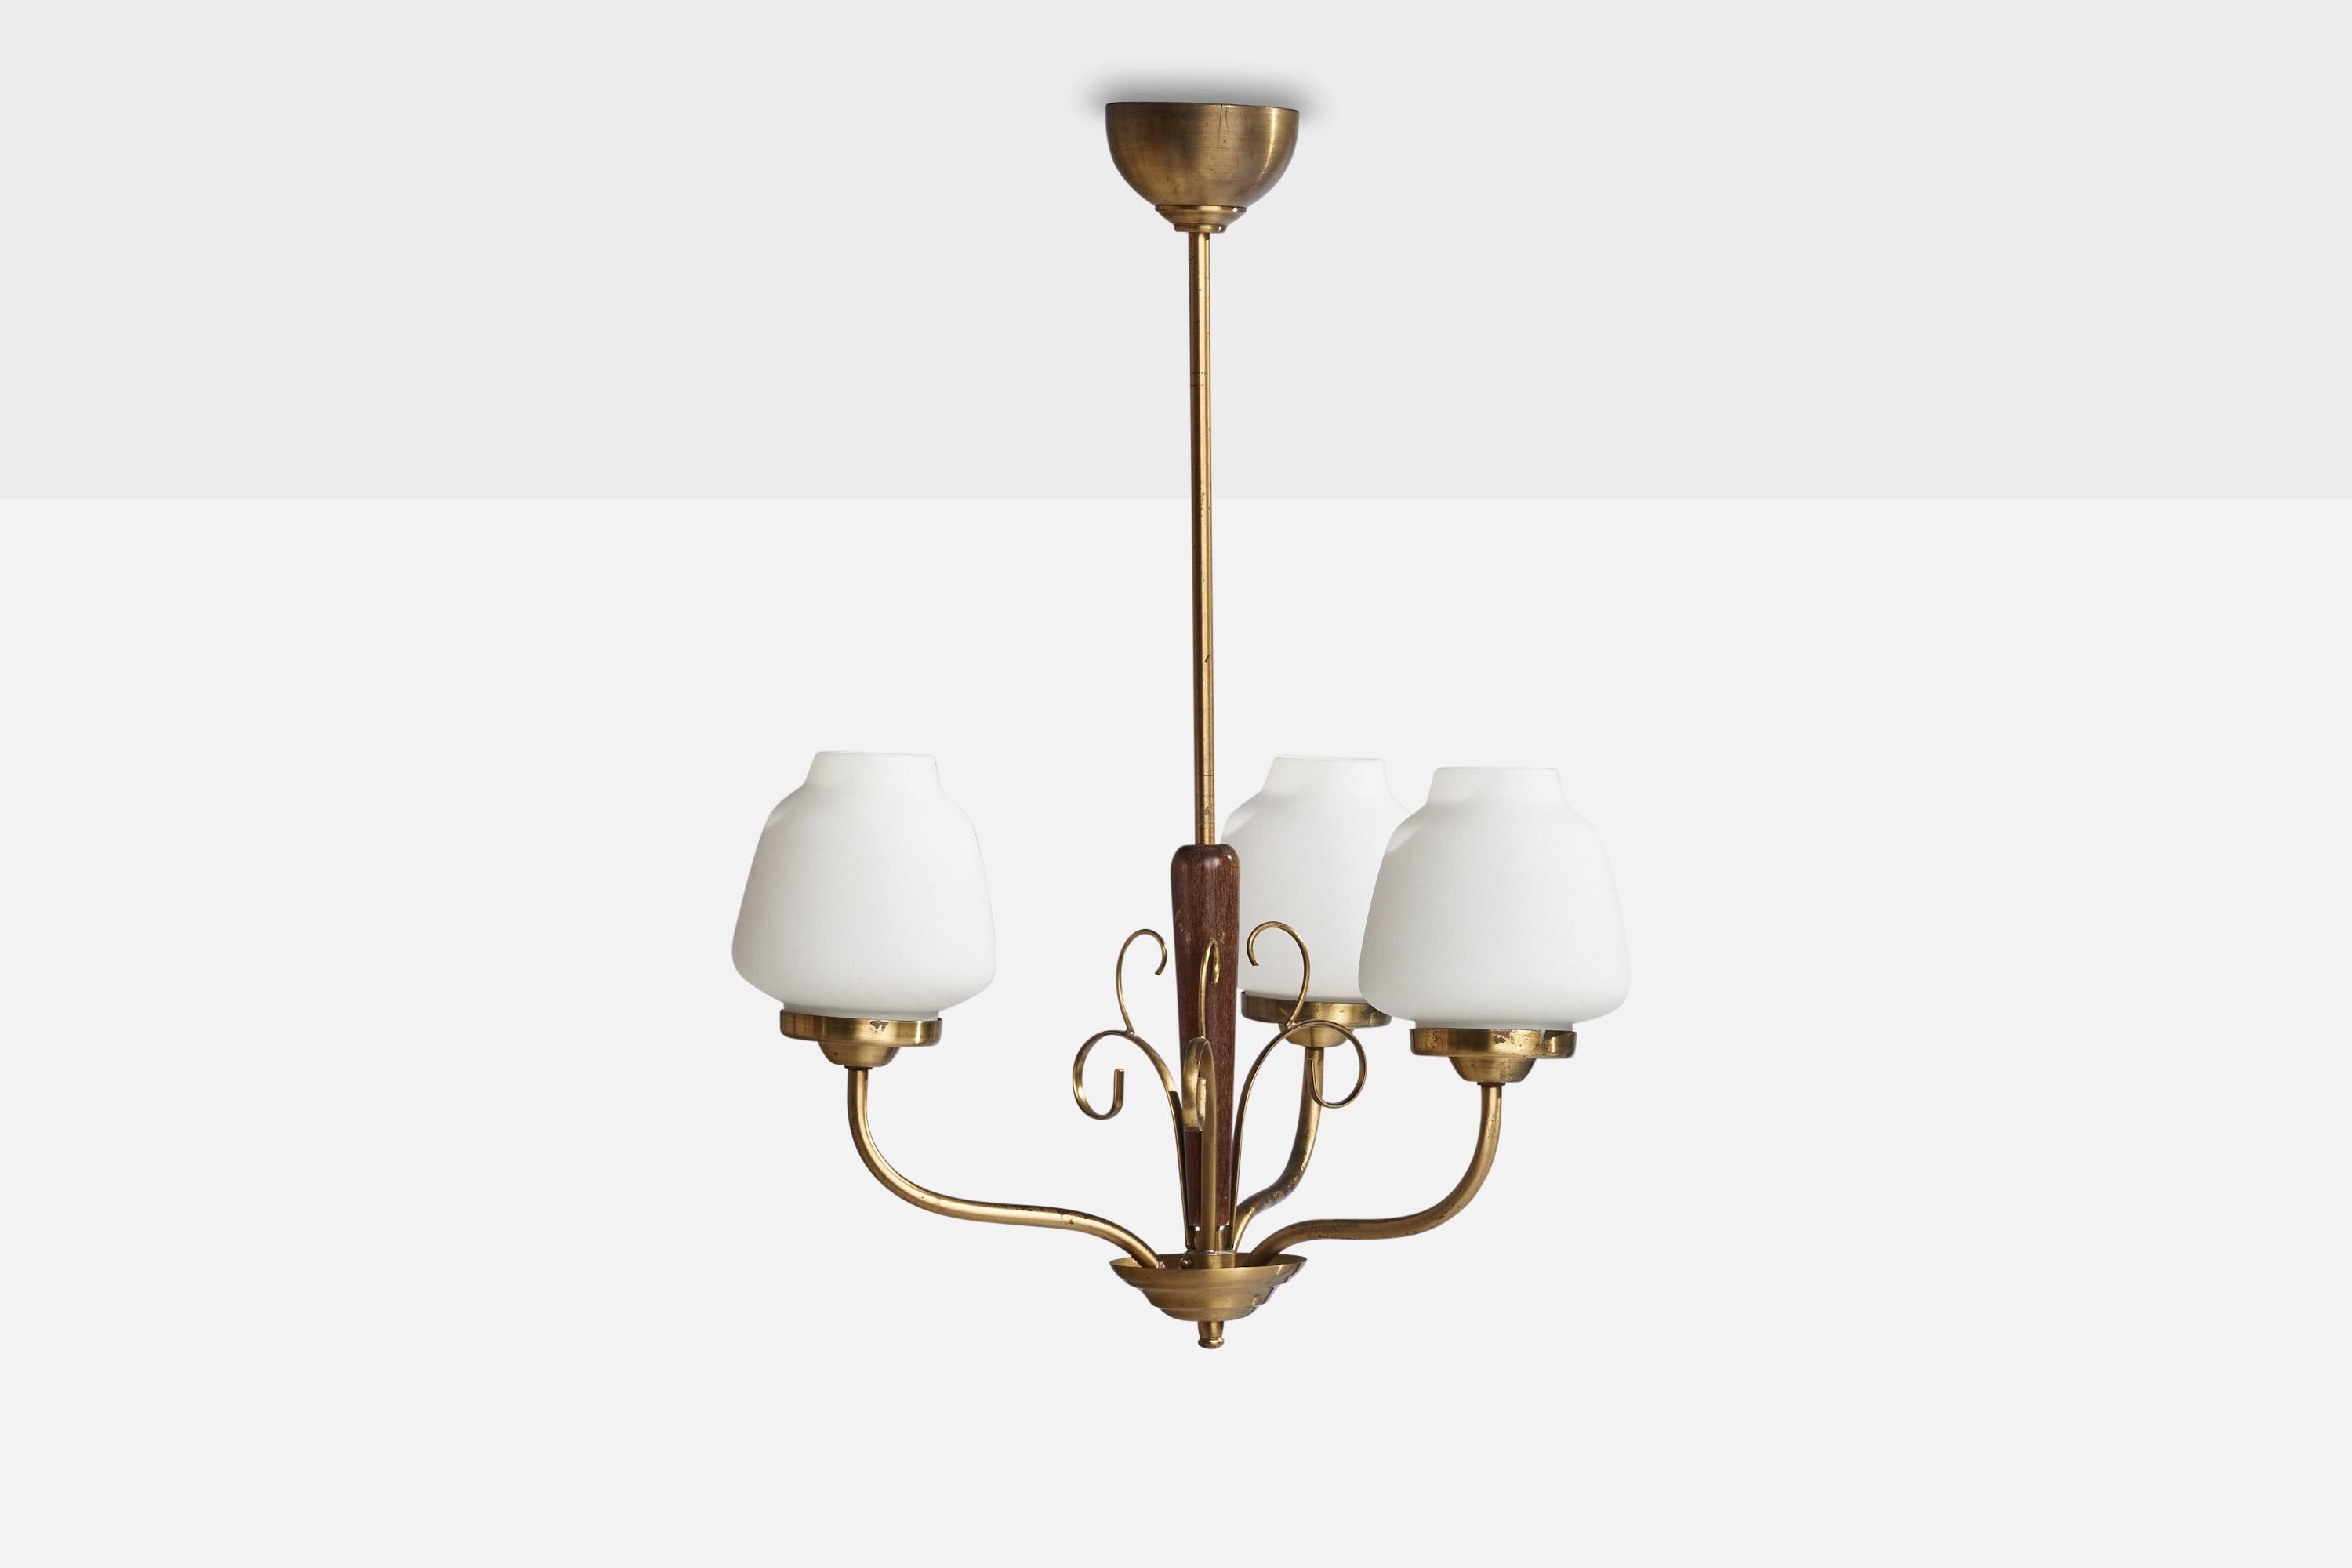 A brass, walnut and opaline chandelier designed and produced in Sweden, 1940s.

Dimensions of canopy (inches): 2.25” H x 3.5” Diameter
Socket takes standard E-26 bulbs. 3 sockets.There is no maximum wattage stated on the fixture. All lighting will